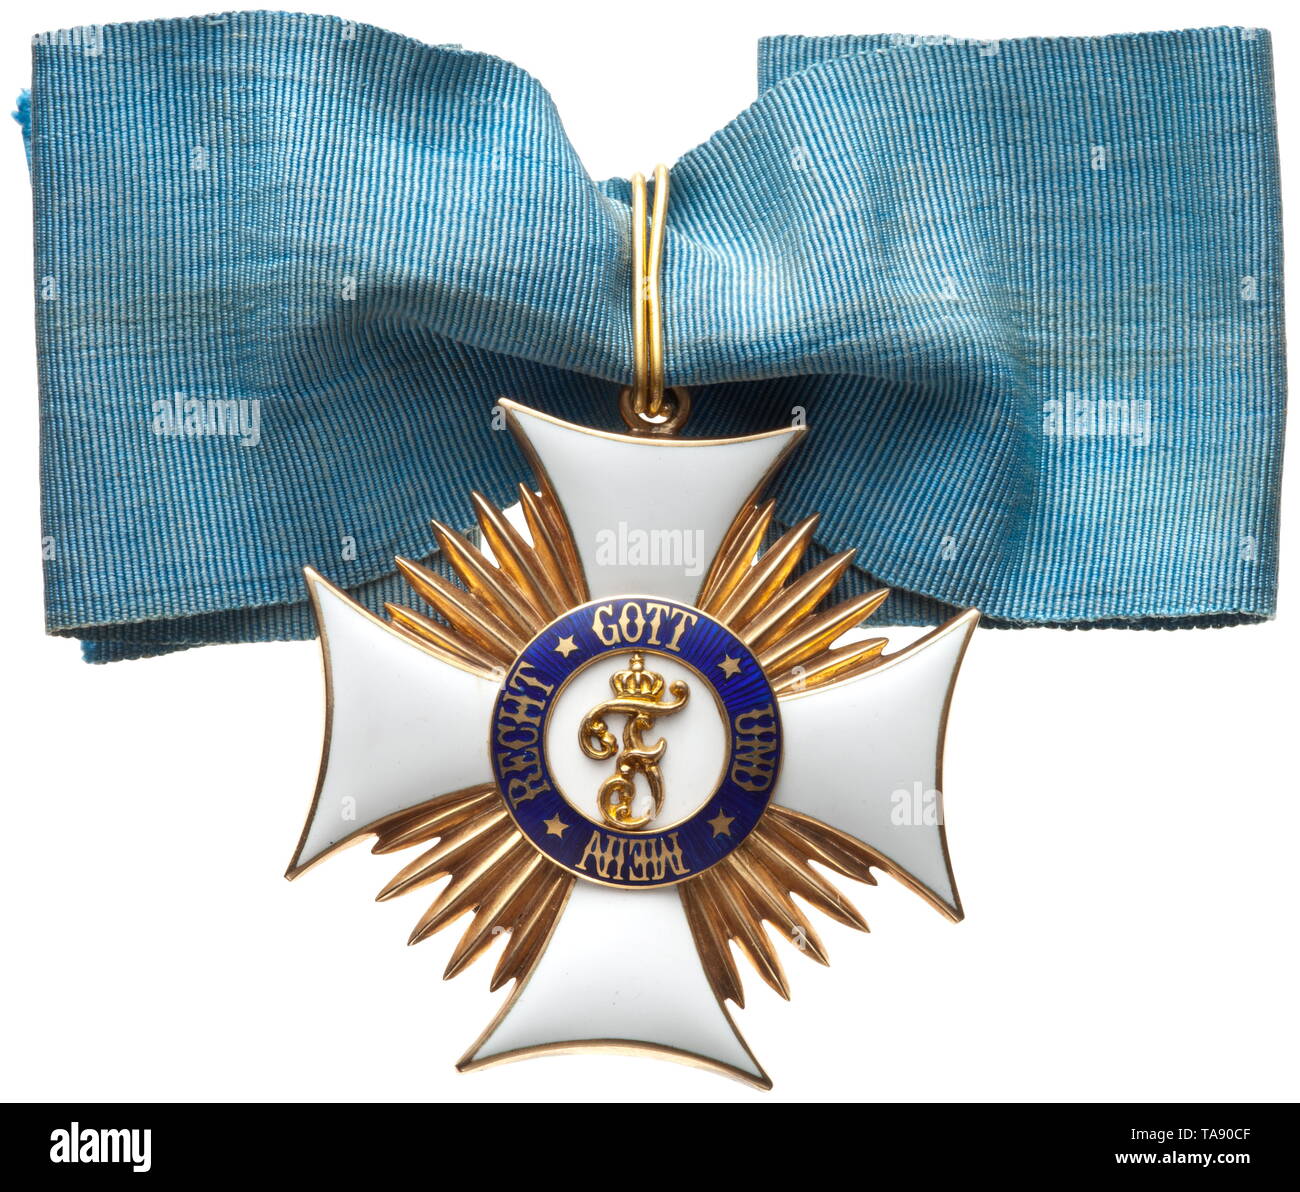 Friedrich Order - a commander's cross Neck cross fashioned in gold and enamel by the firm Eduard Foehr in Stuttgart about 1900, a small repair in the translucent blue enamel of the reverse medallion. On a somewhat faded neck ribbon for wear. Width 53.5 mm. Weight 31.9 g historic, historical, medal, decoration, medals, decorations, badge of honour, badge of honor, badges of honour, badges of honor, 20th century, Additional-Rights-Clearance-Info-Not-Available Stock Photo